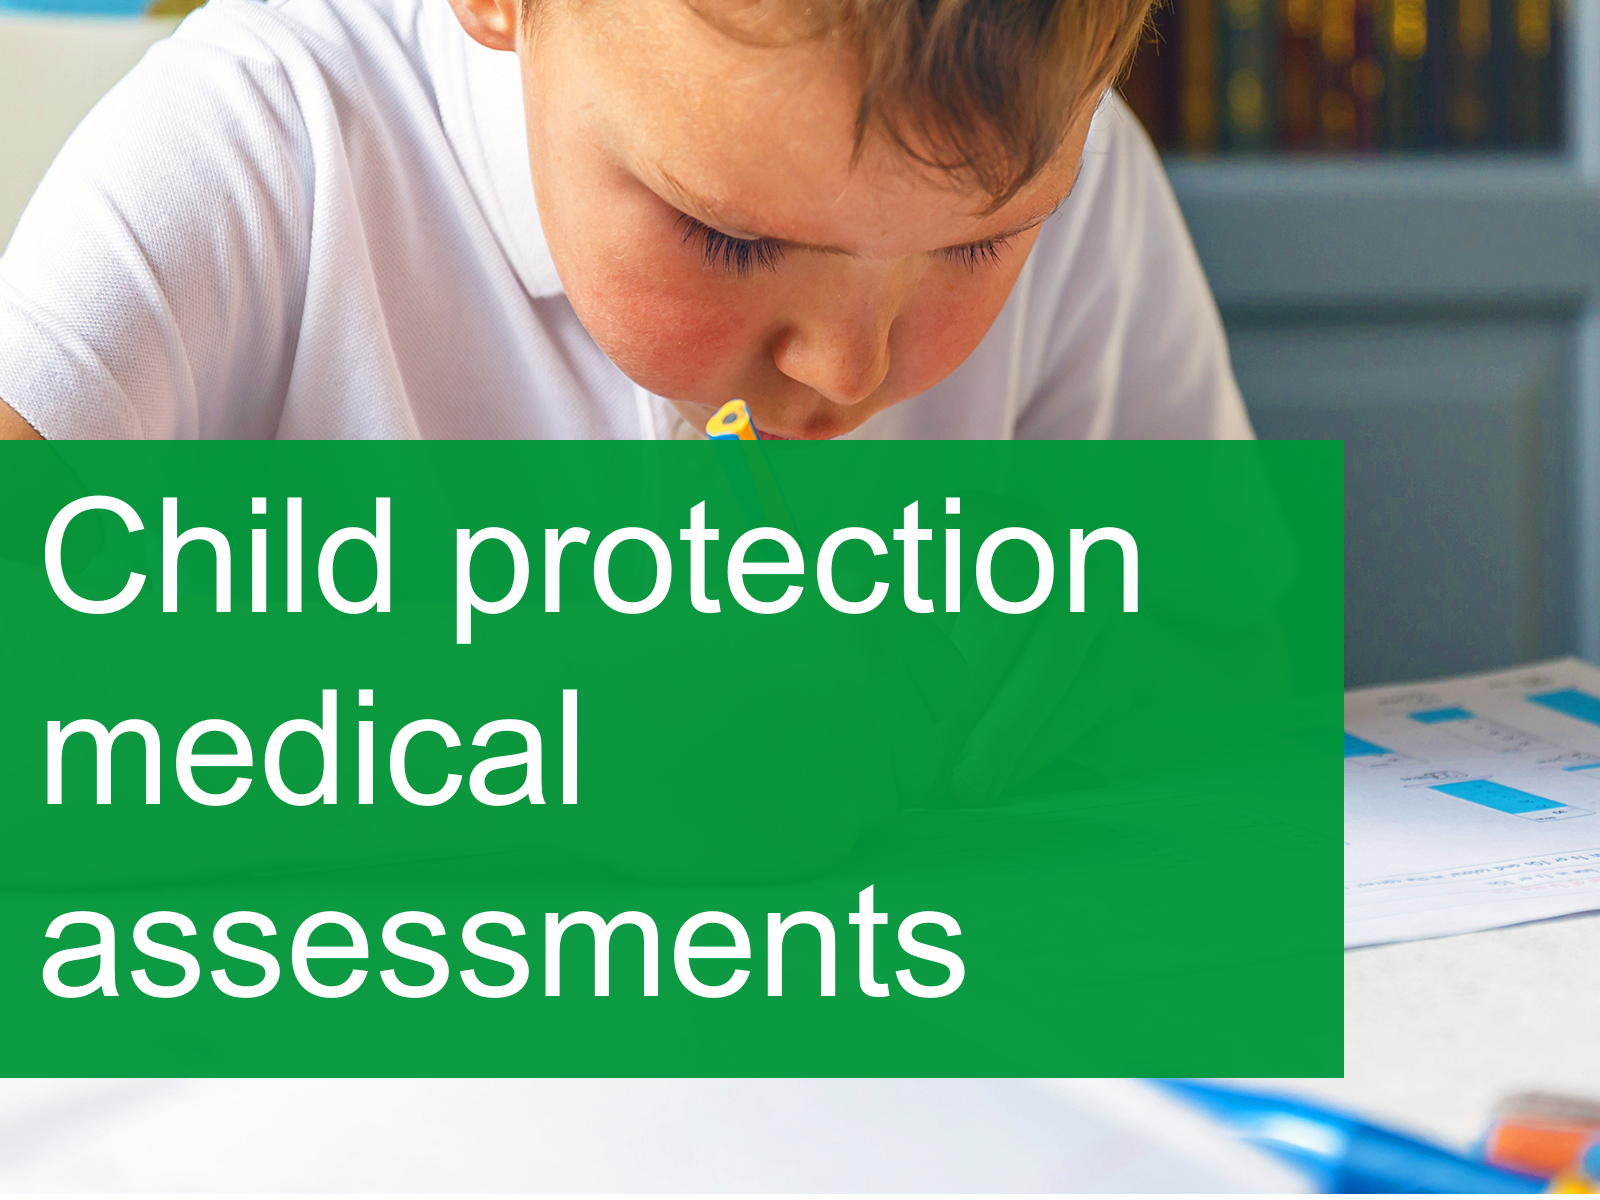 Child protection medical assessments